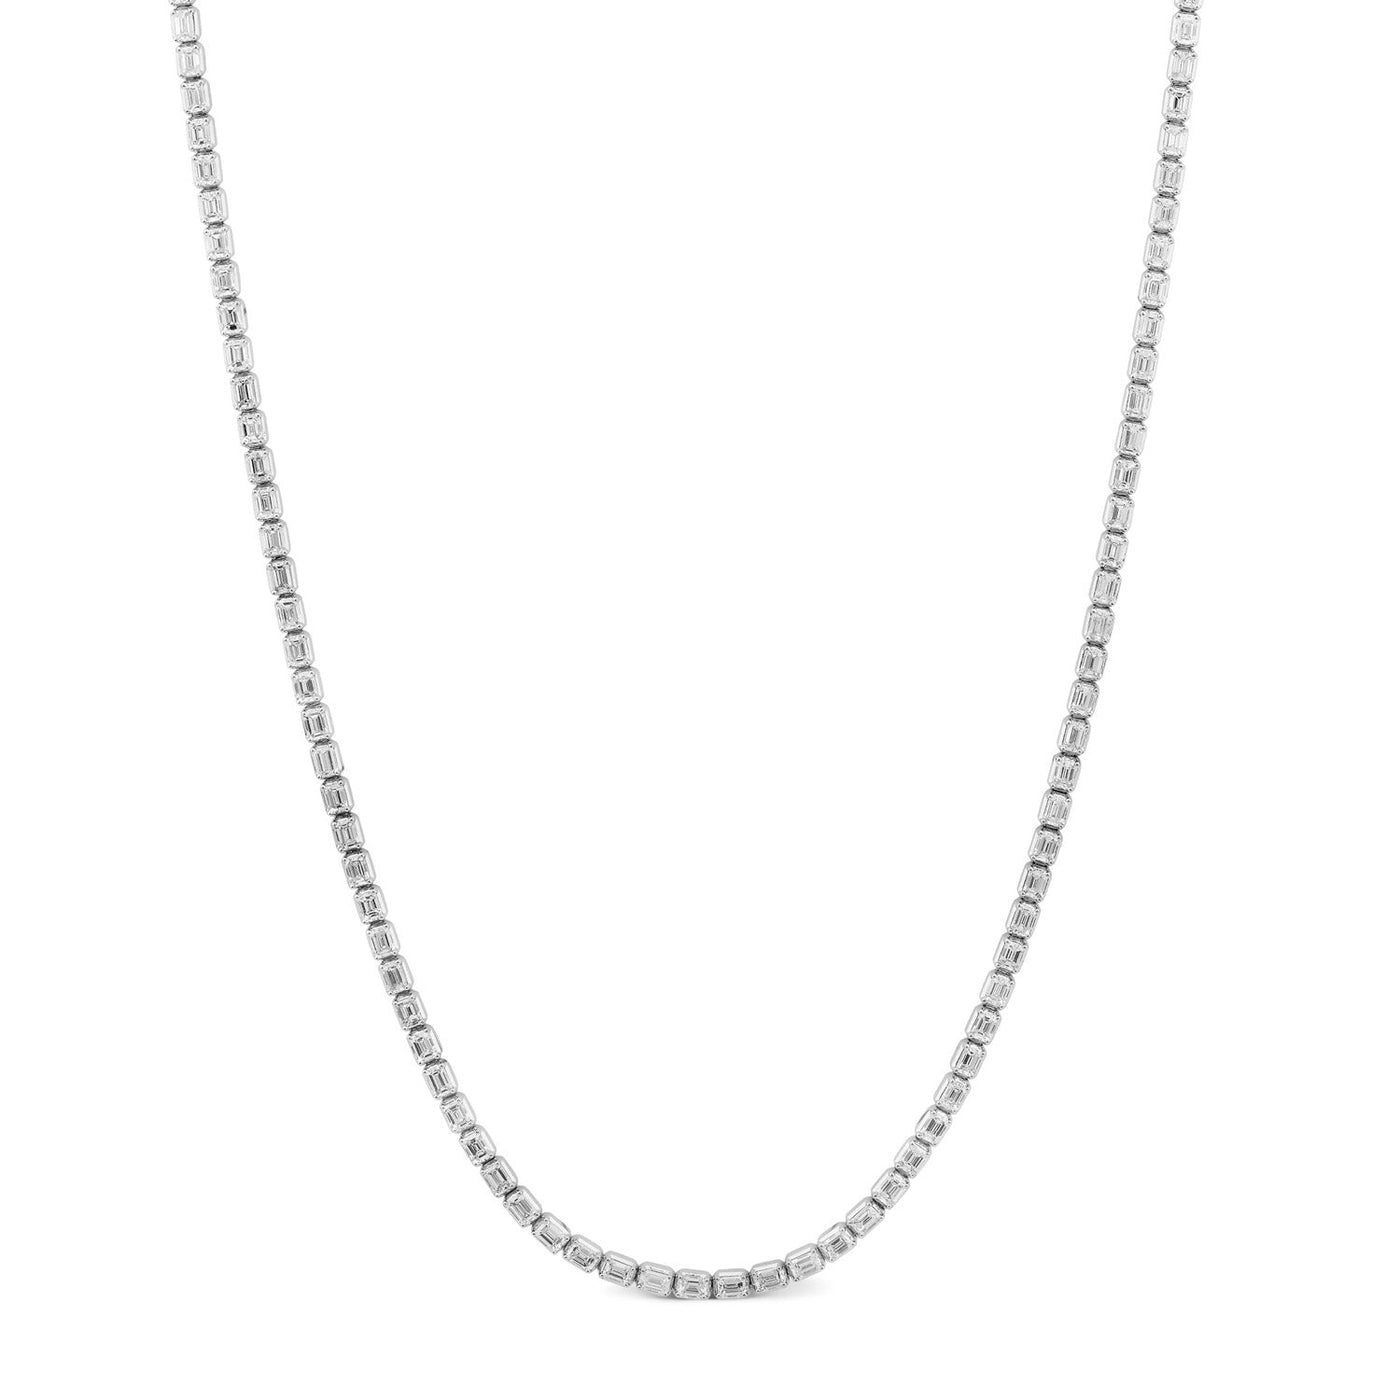 8.00ct Lab Grown Diamond Necklace in 18K White Gold